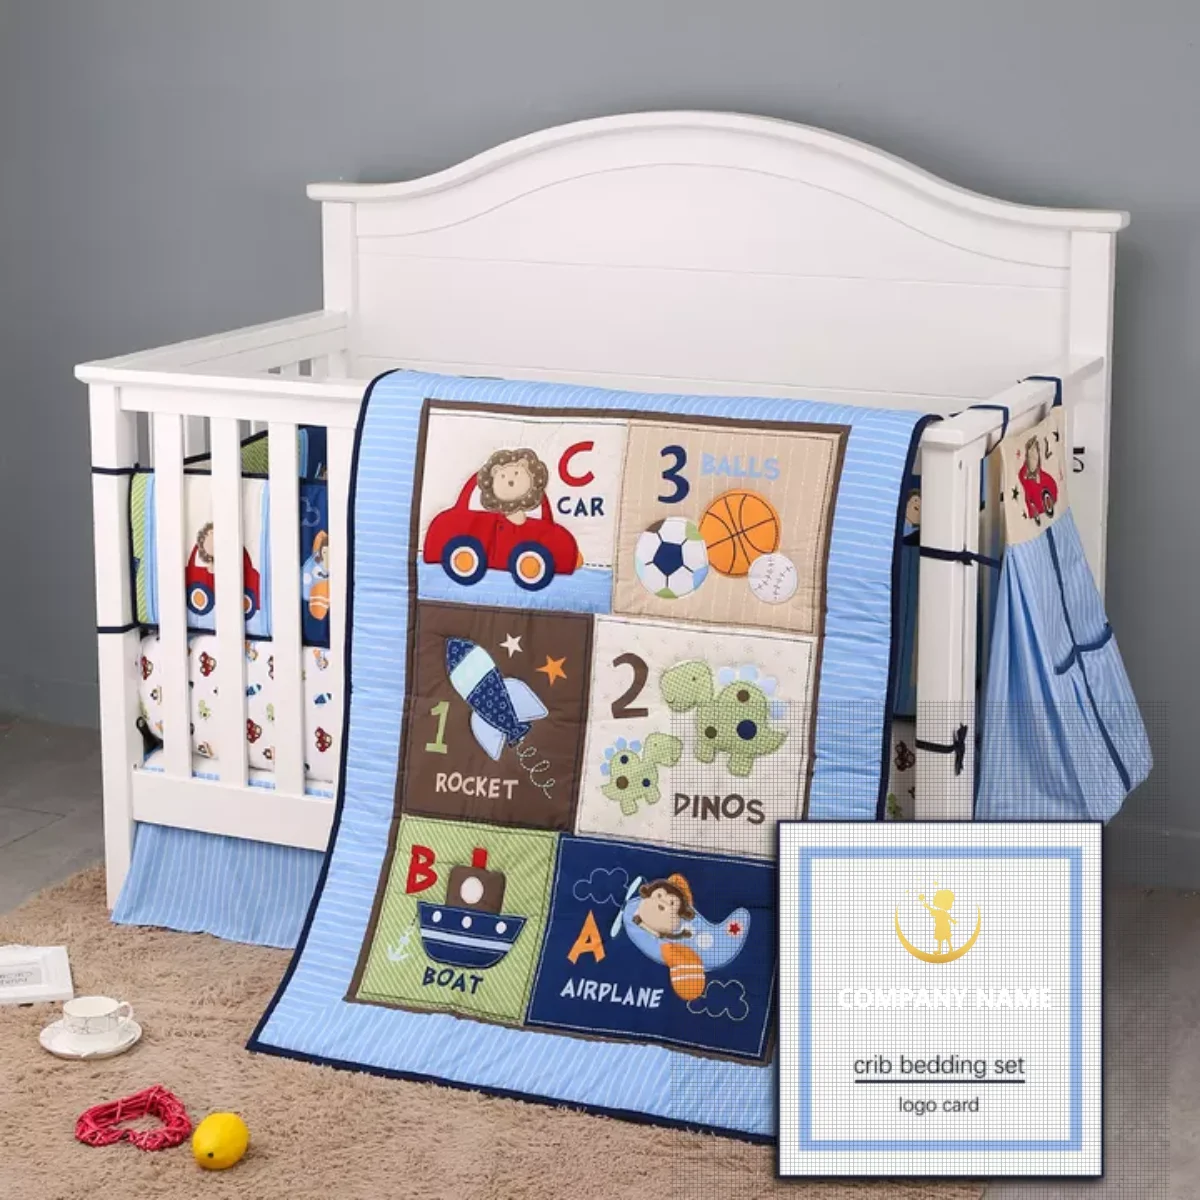 Blue Crib Bedding Sets For Boys 7 Piece Travel Car And Airplane For Baby Buy Bedding Sets For Kids Navy Blue Bedding Set European Baby Bedding Set Product On Alibaba Com